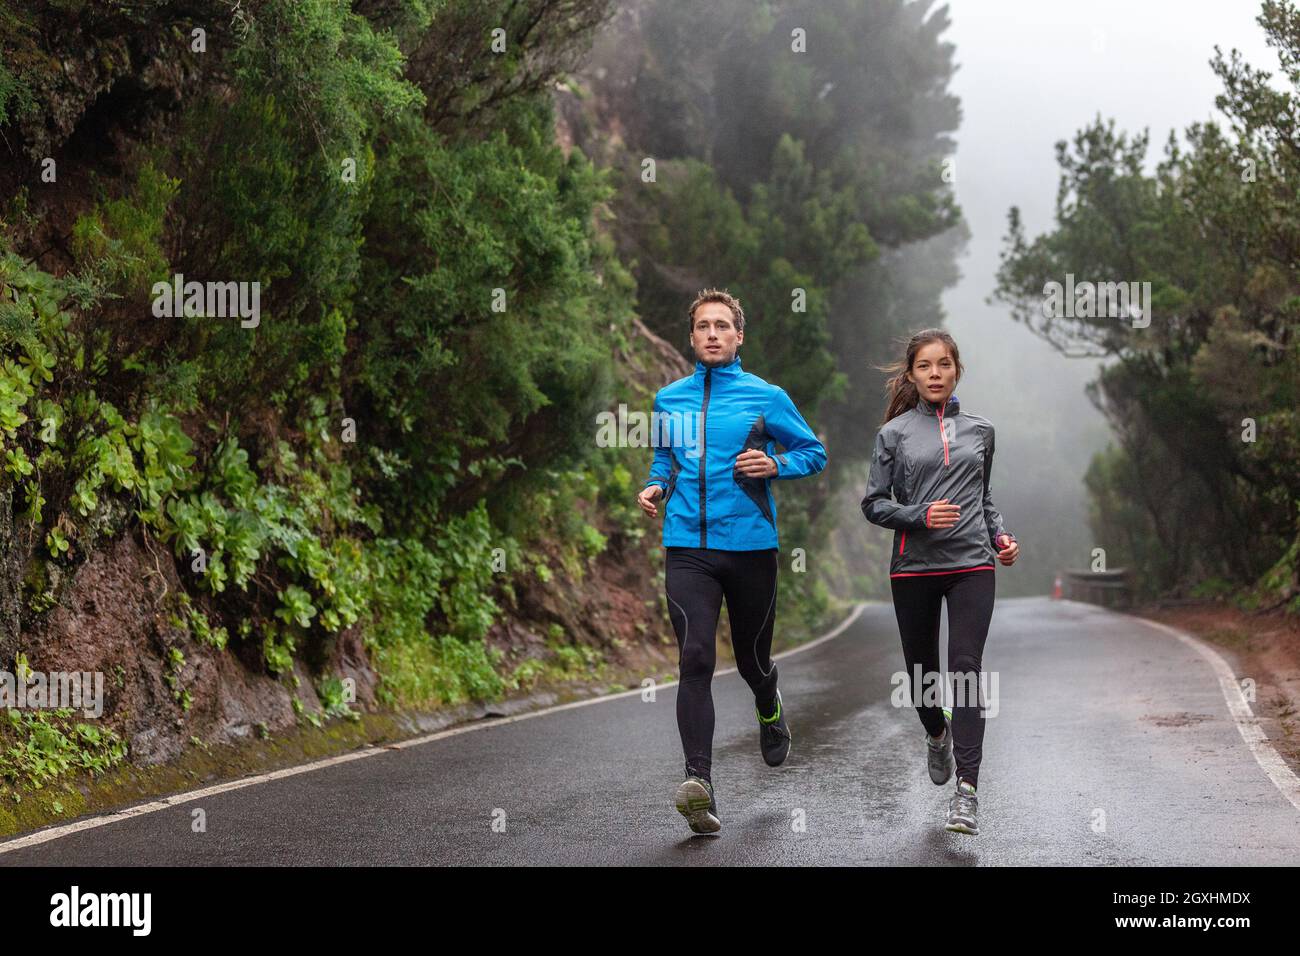 Rain run fit people training jogging in rain weather wearing cold clothing running outdoors in nature autumn season. Active couple on wet park trail Stock Photo